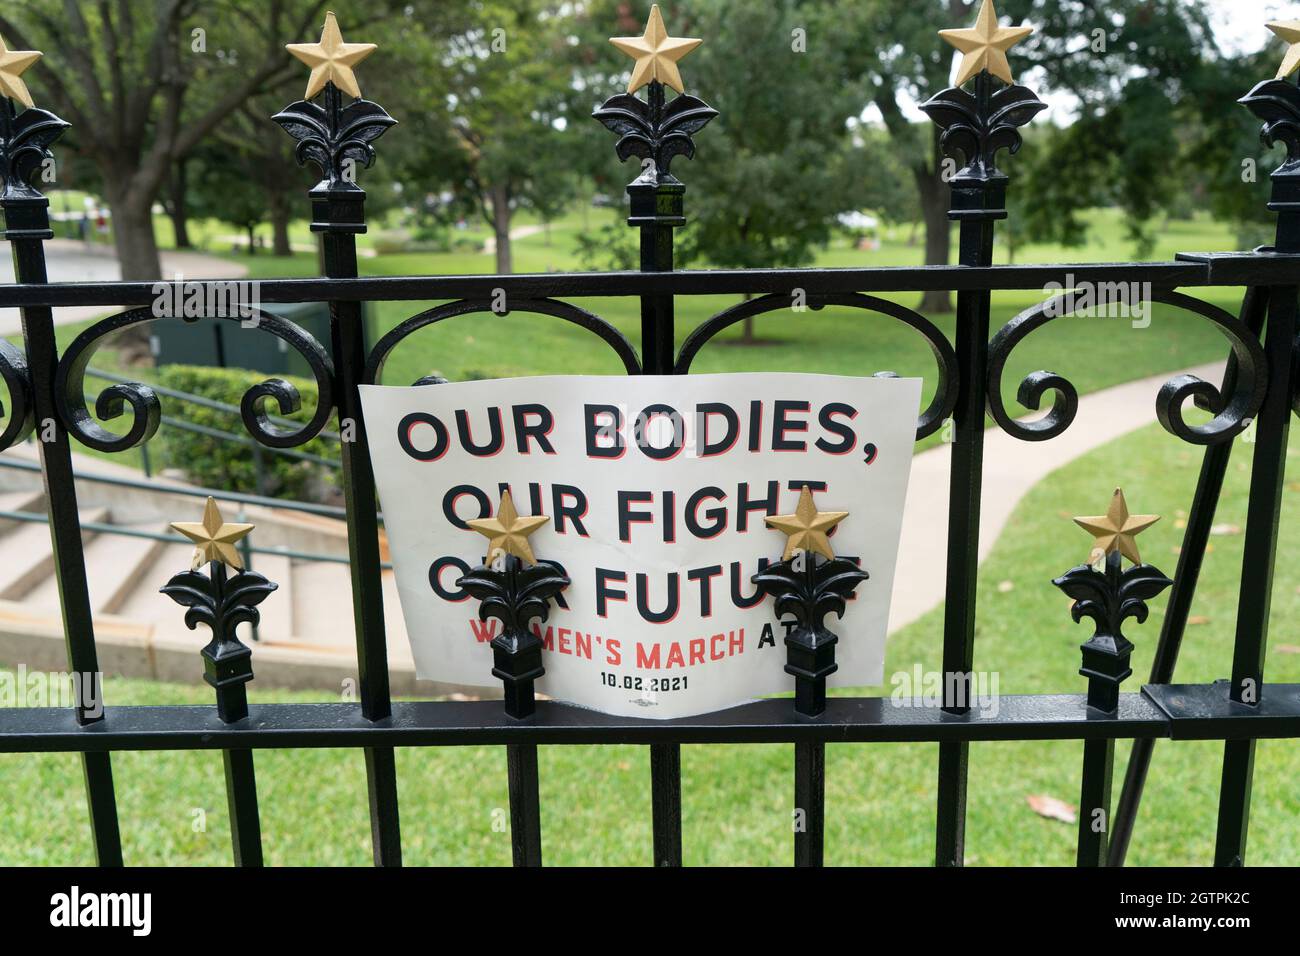 A sign on the Texas Capitol fence promotes the Women's March, at which several thousand Texas women rallied at the Capitol south steps to protest recent Texas laws passed restricting women's right to abortion. A restrictive Texas abortion law makes it a crime to have an abortion after six weeks in most cases. Credit: Bob Daemmrich/Alamy Live News Stock Photo